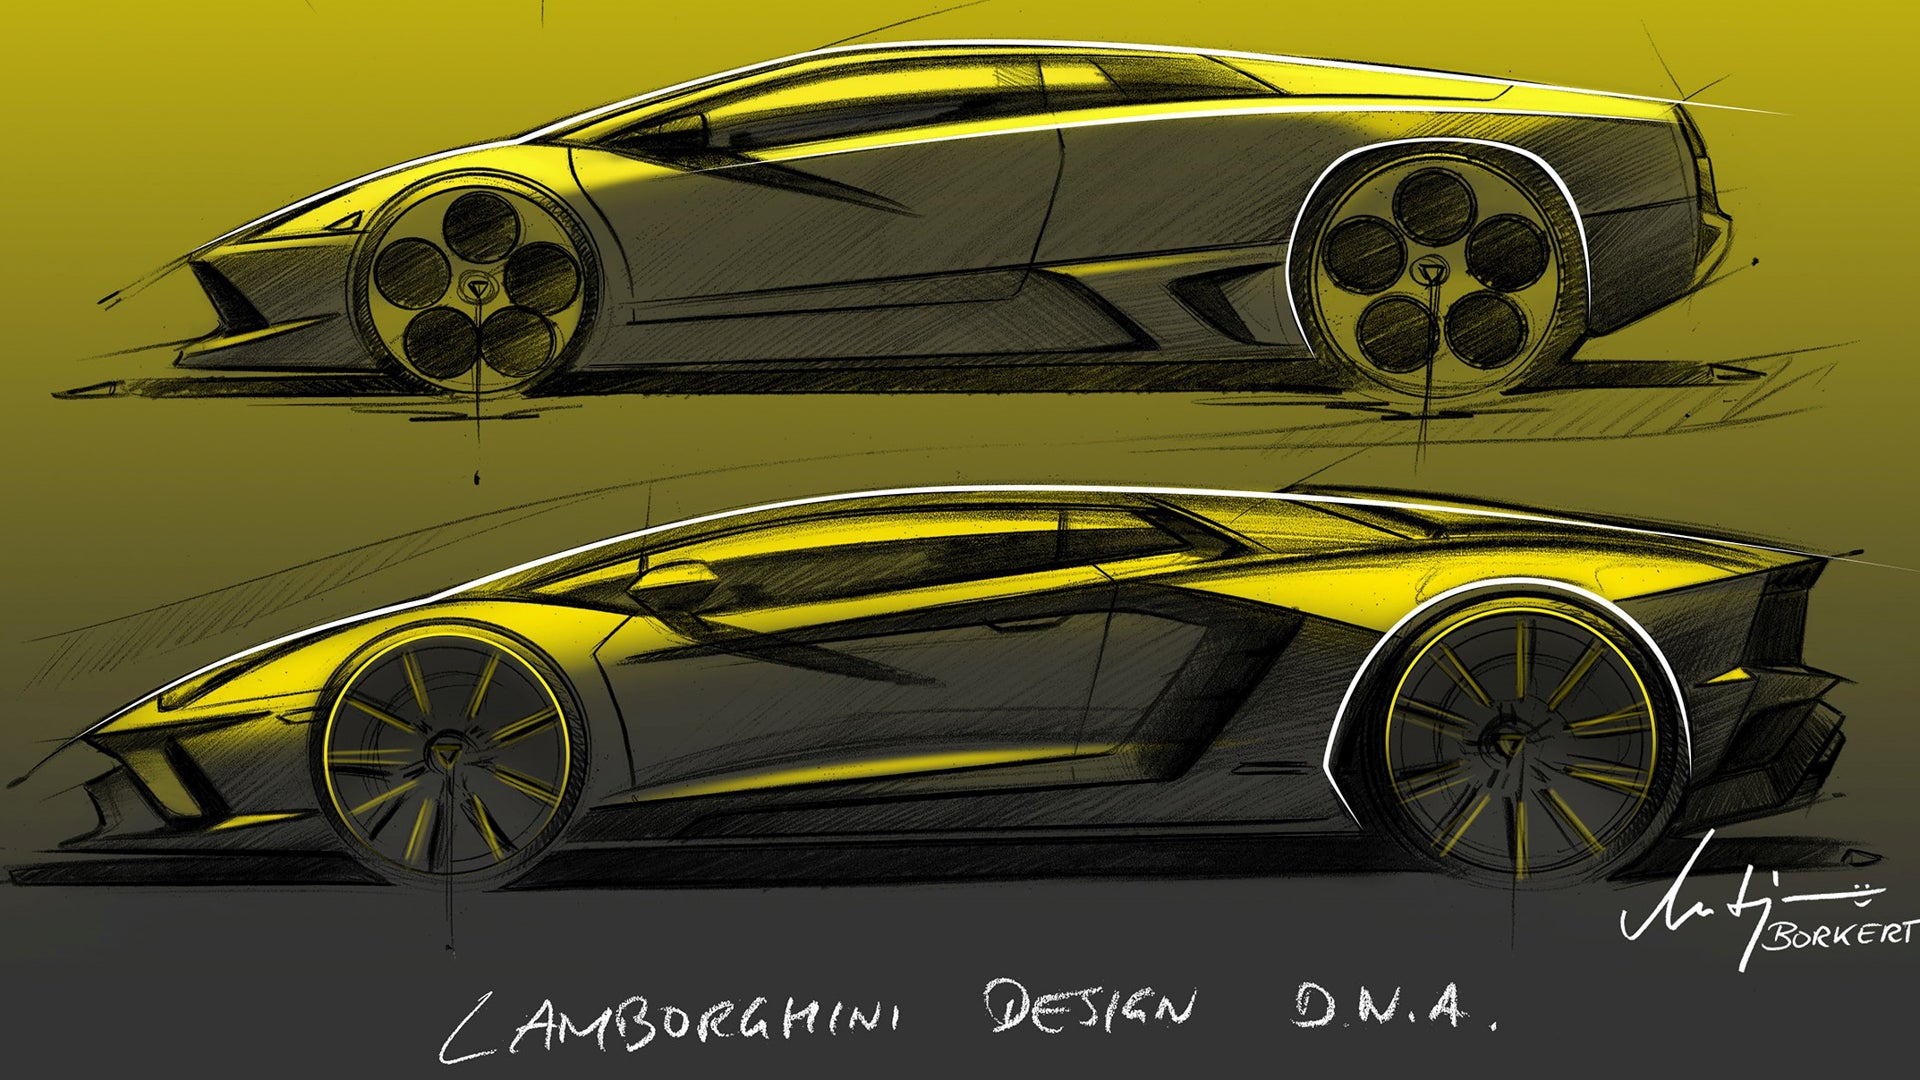 Car Design 101: Learn From the Pros With This Free Online Course